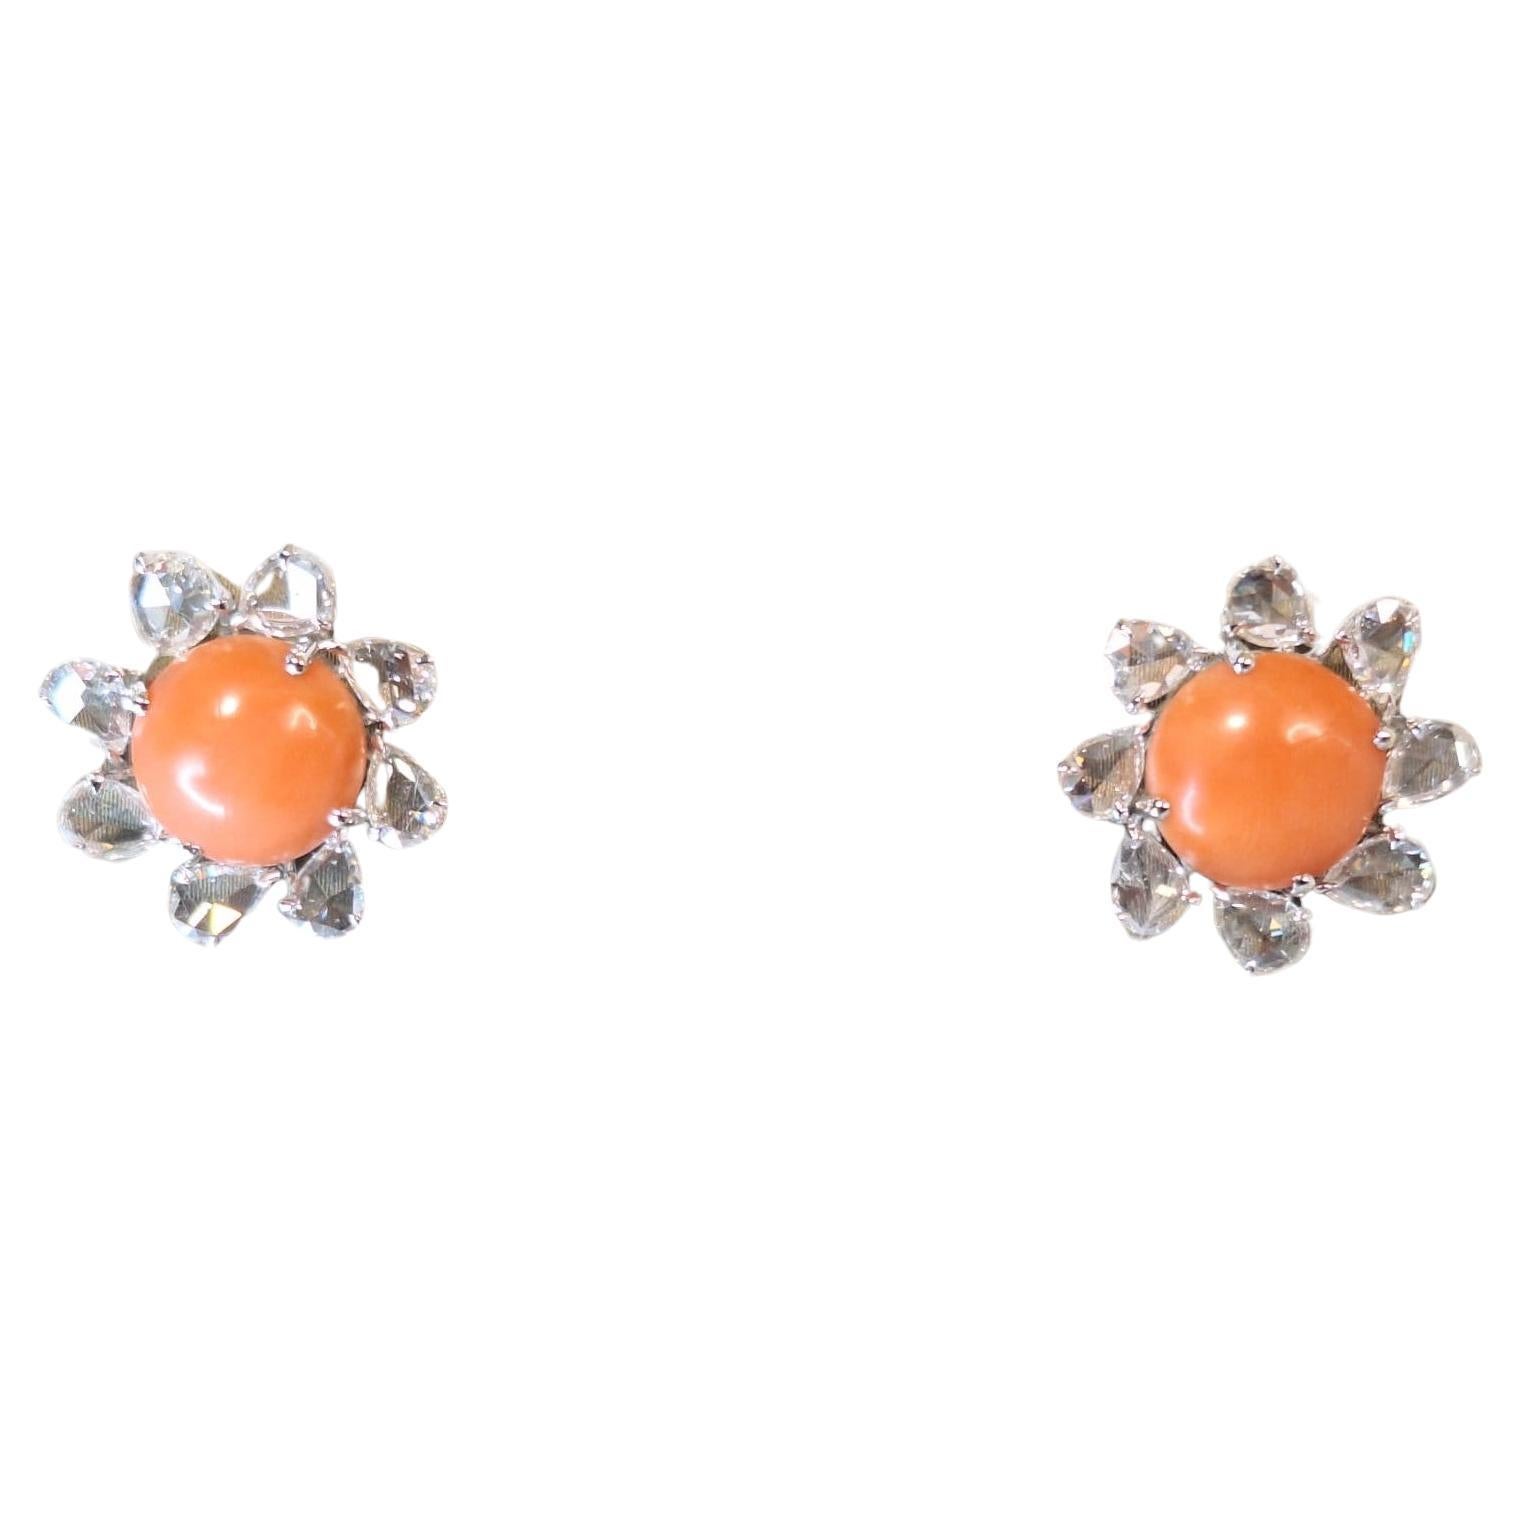 18K White Gold Diamond Earring with Coral